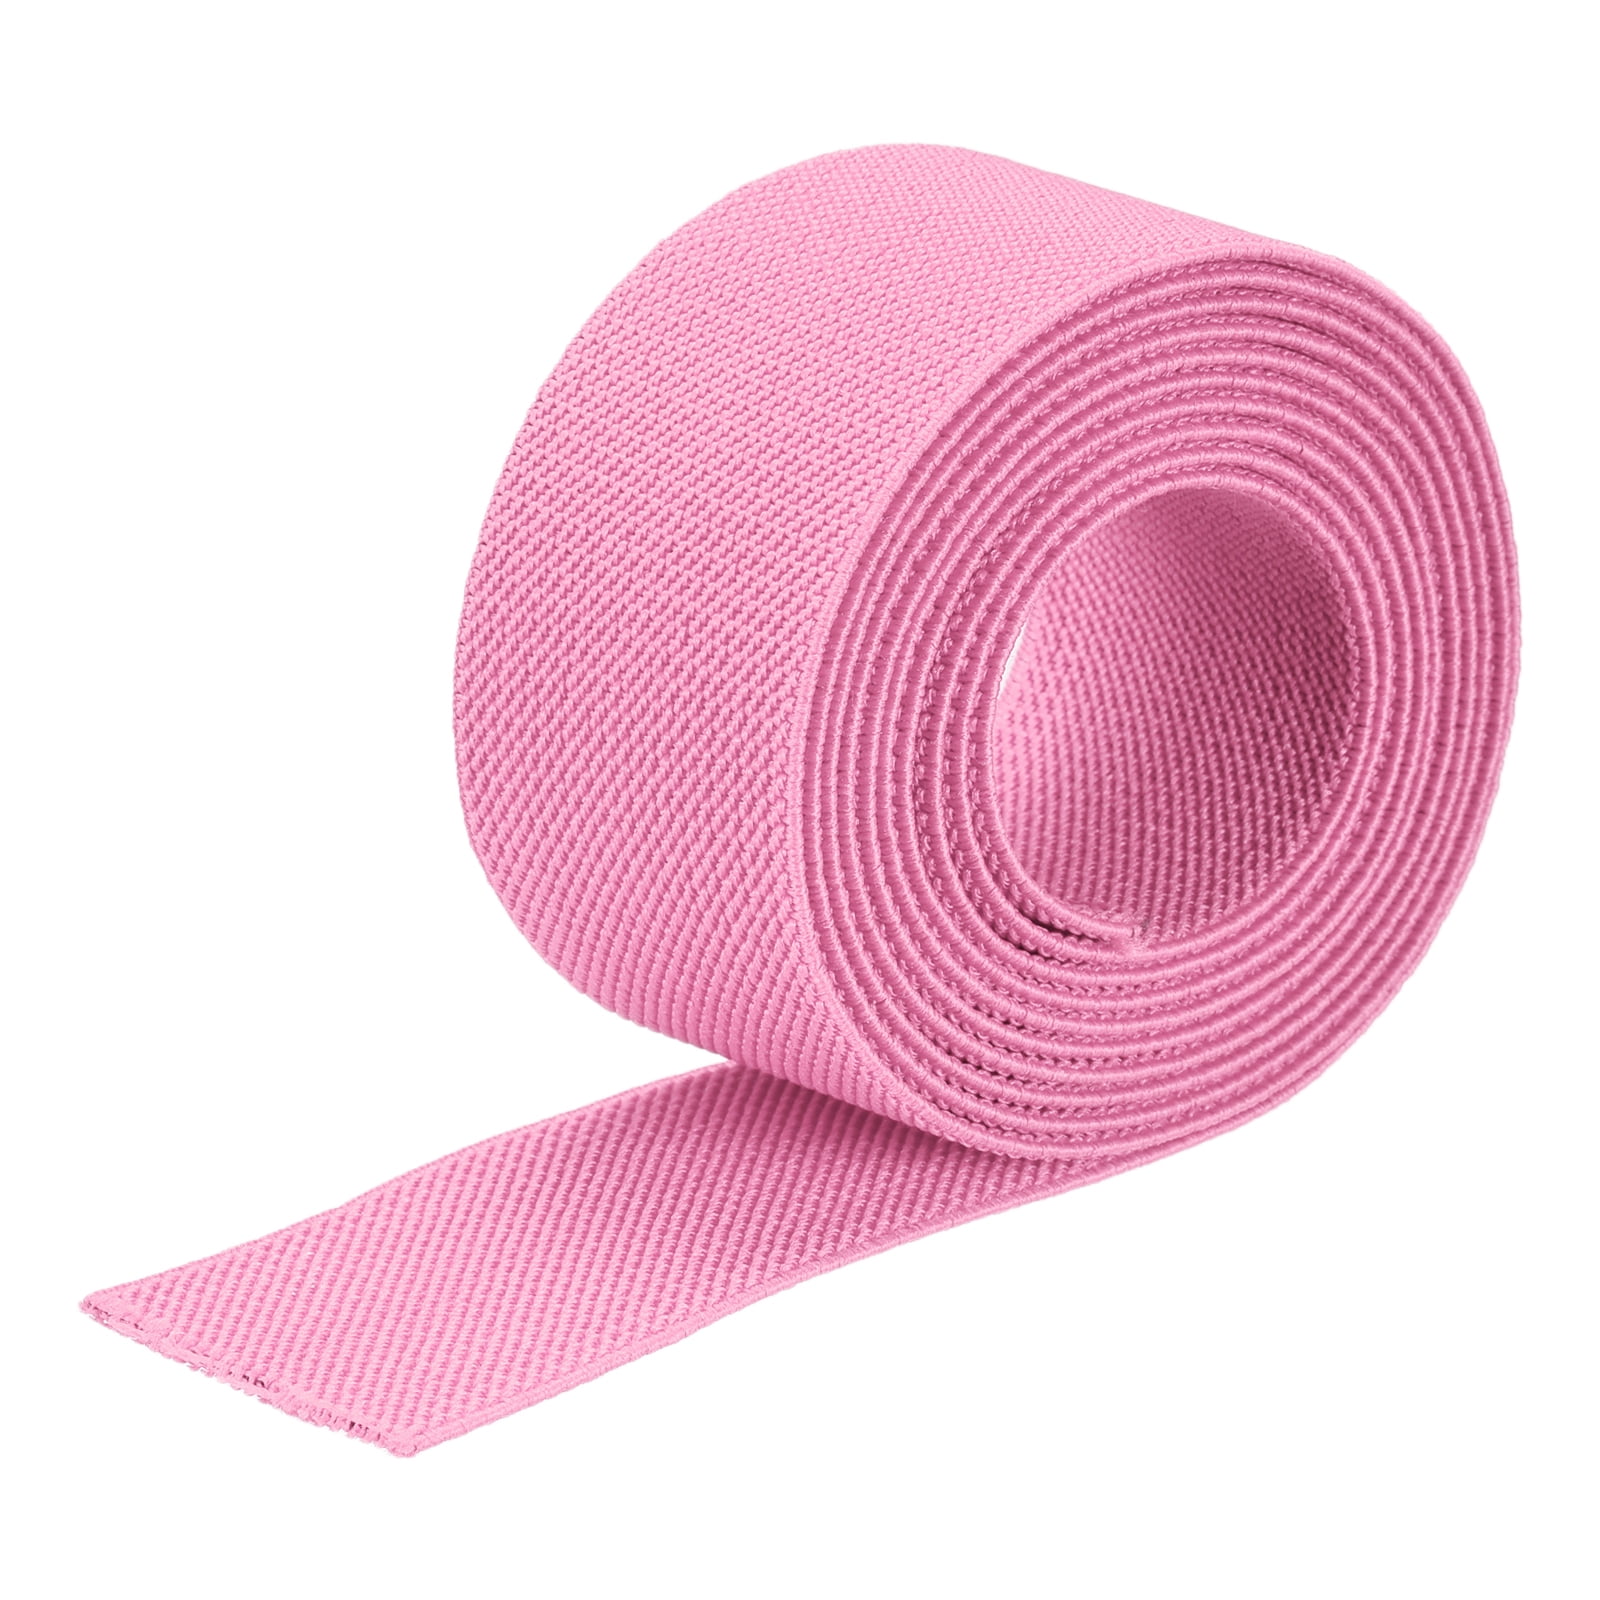 Twill Elastic Band Double Side 1.5 Flat 2 Yard 1 Roll Flat Elastic Ribbon  Cord Pink for Sewing, Waistband